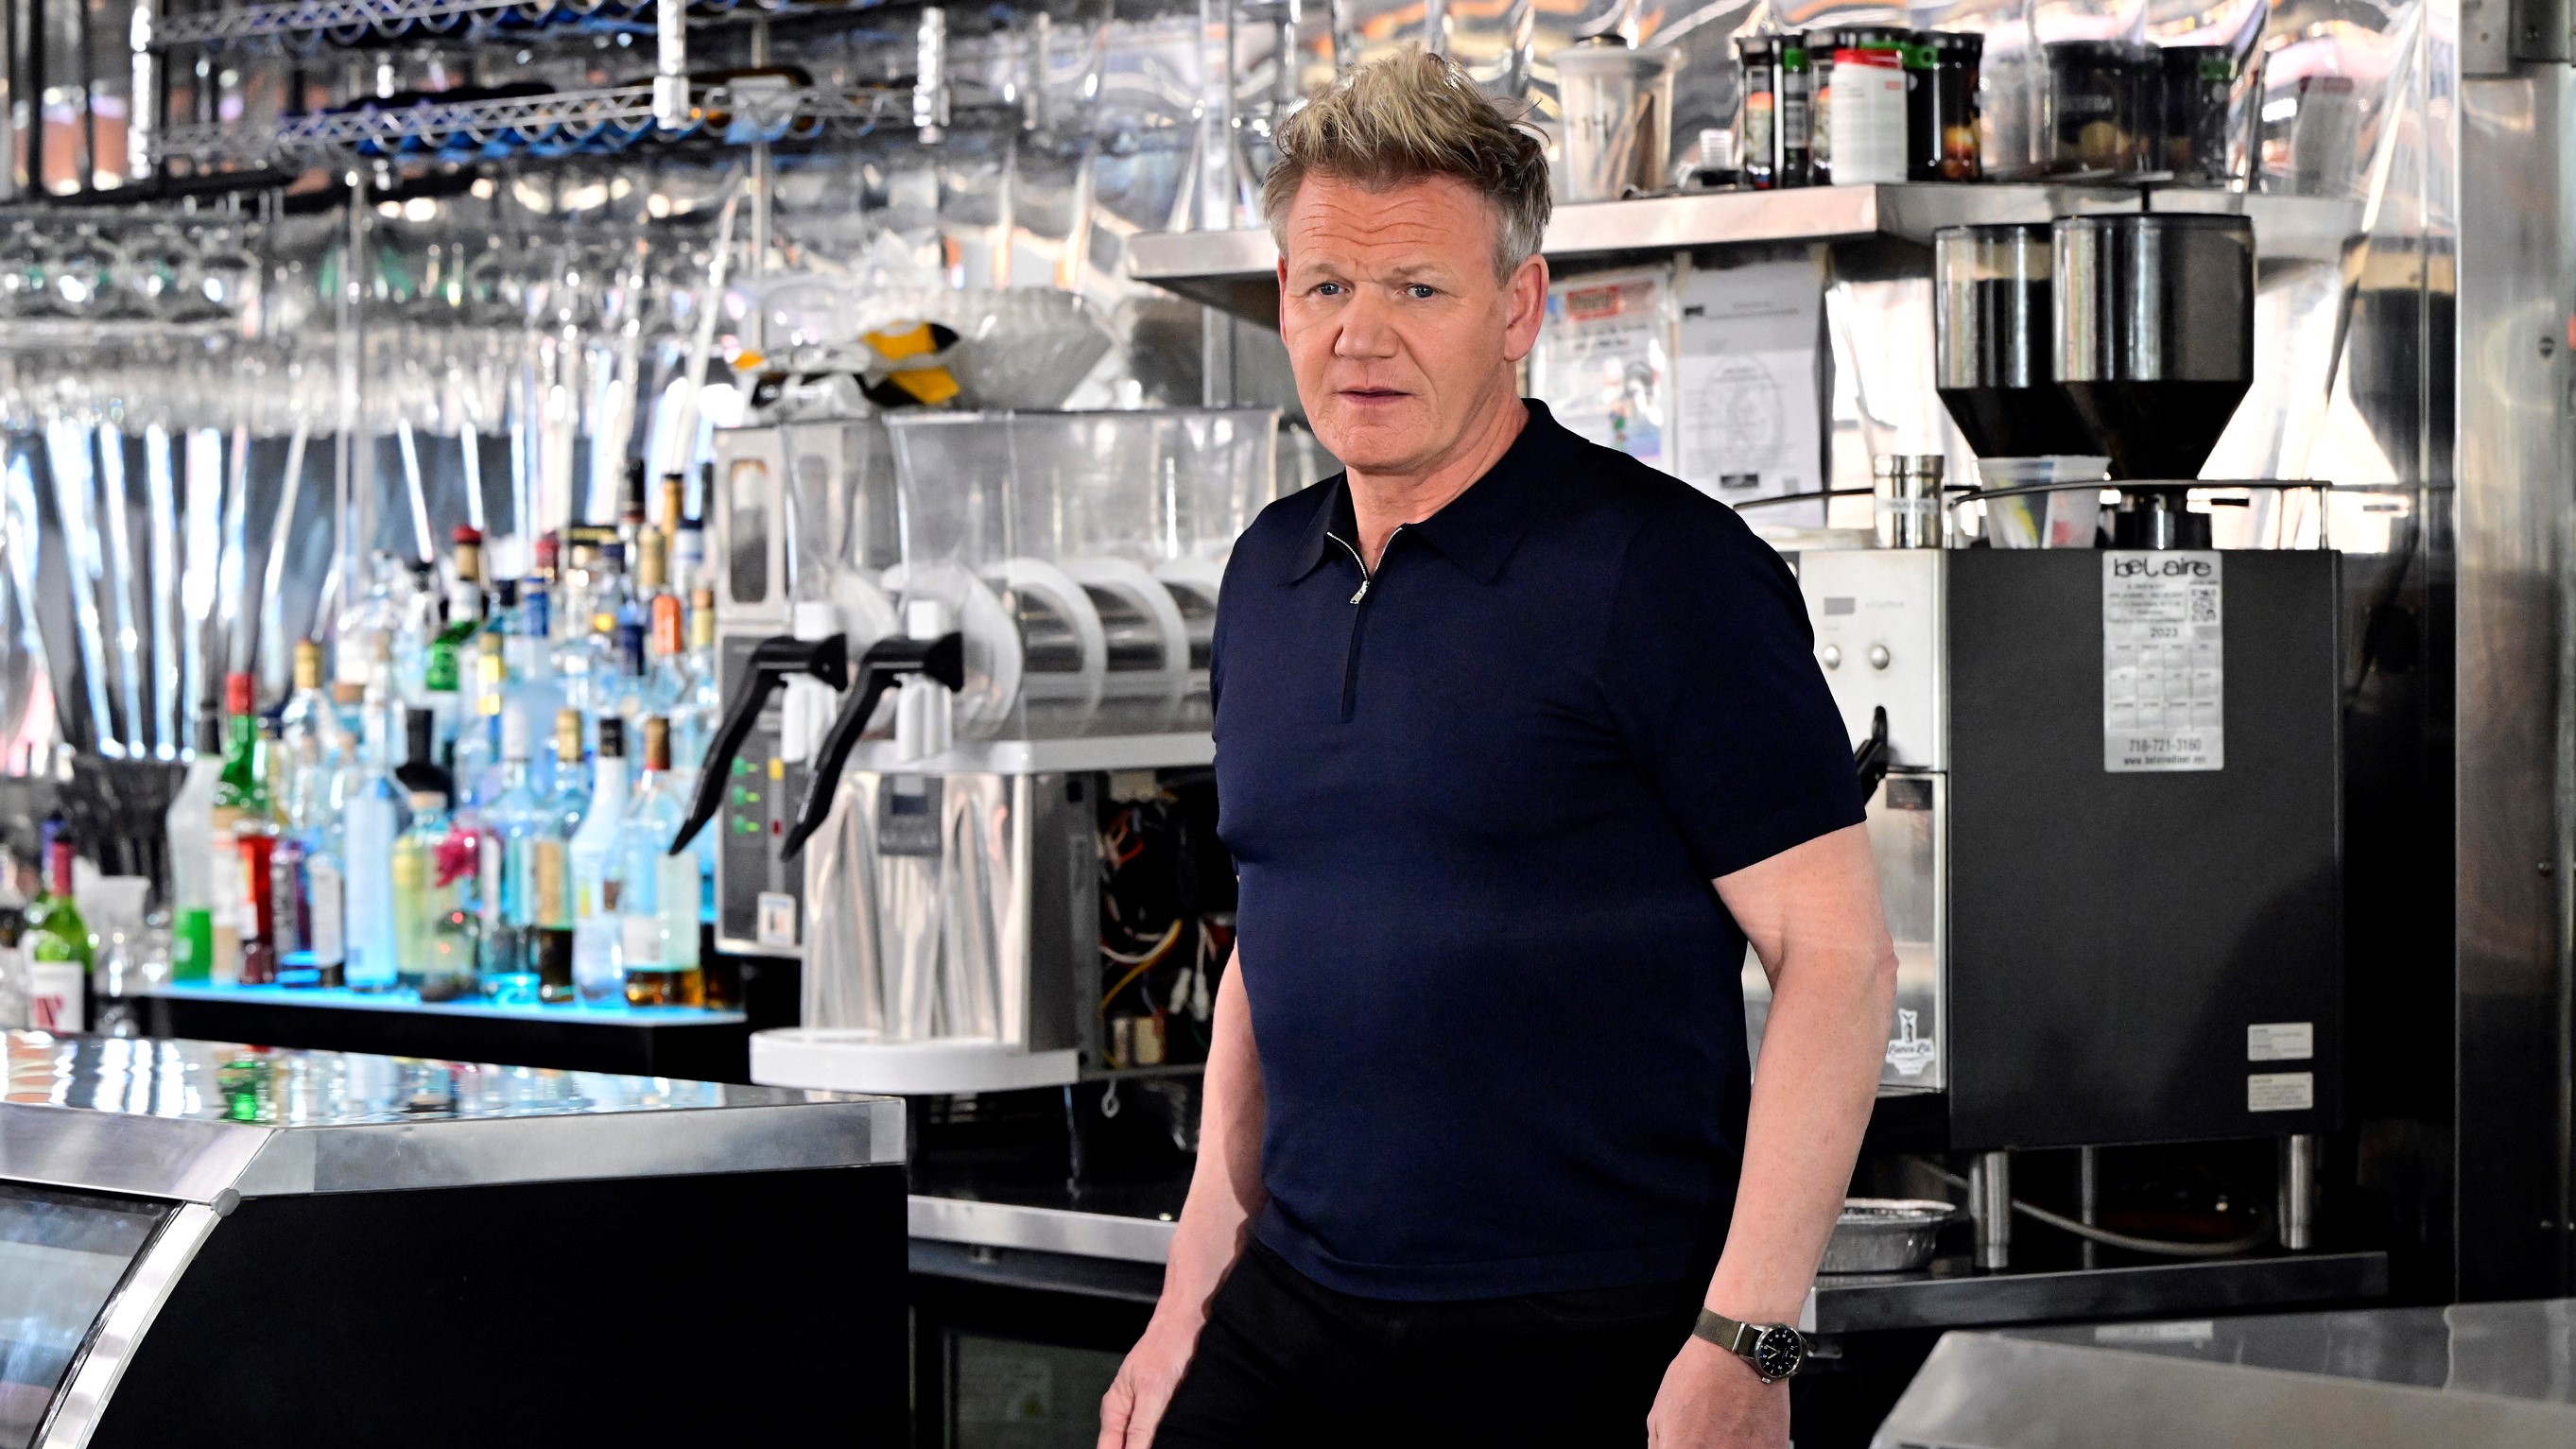 Kitchen Nightmares season 8 release date and…